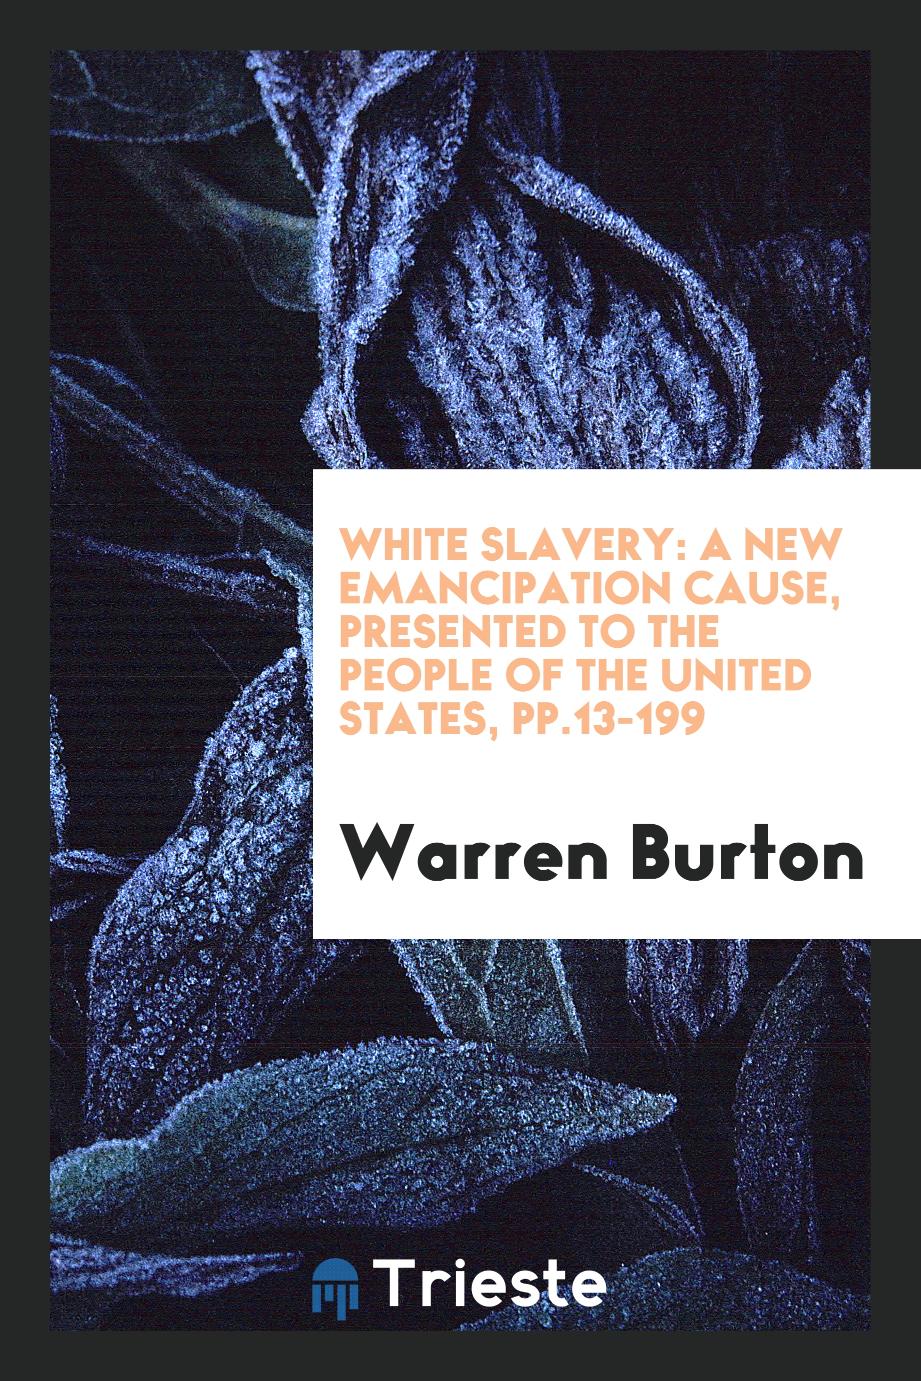 White slavery: a new emancipation cause, presented to the people of the United States, pp.13-199